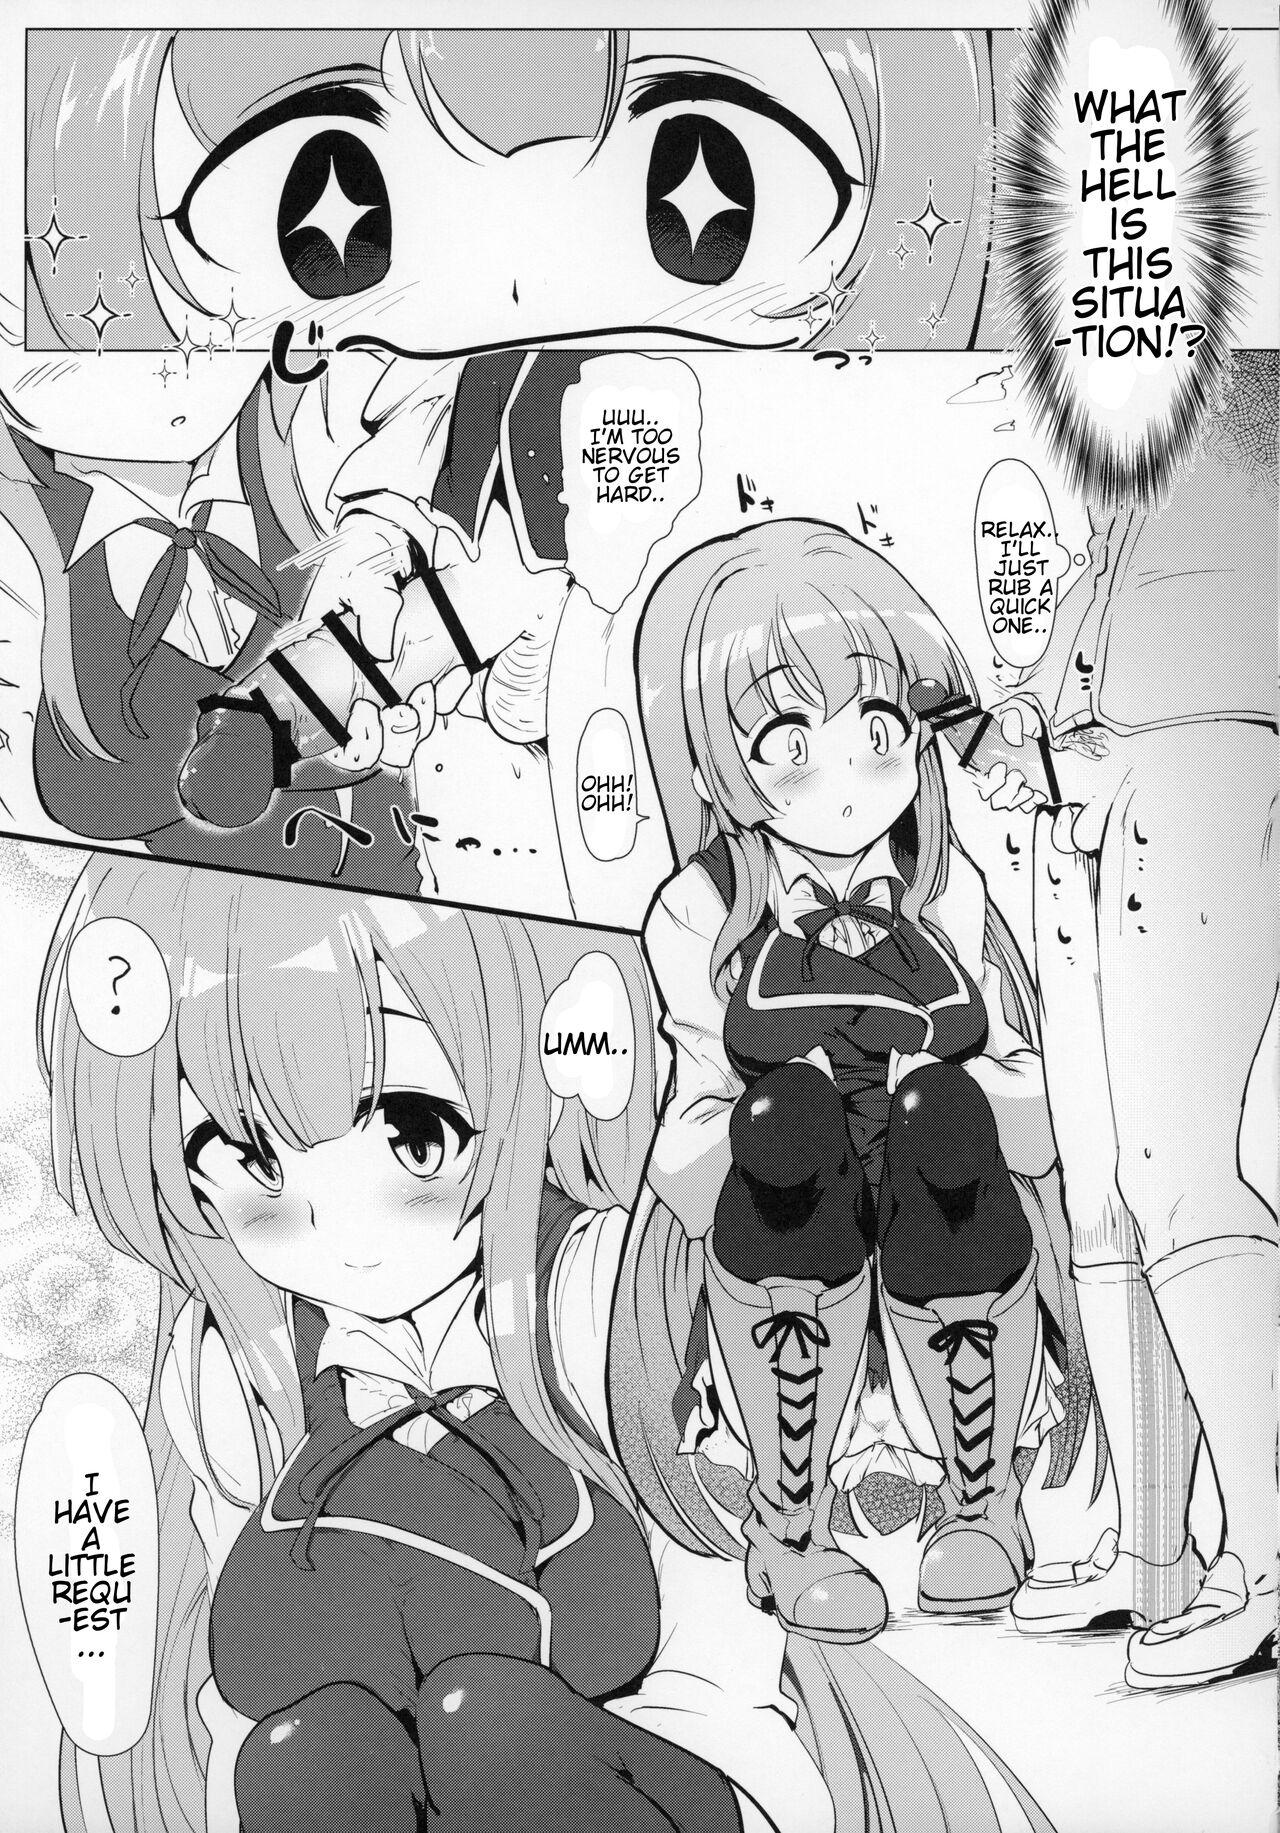 Women Sucking There's No Way An Ecchi Event Will Happen Between Me and the Princess of Manaria Kingdom! - Manaria friends Amature Porn - Page 10